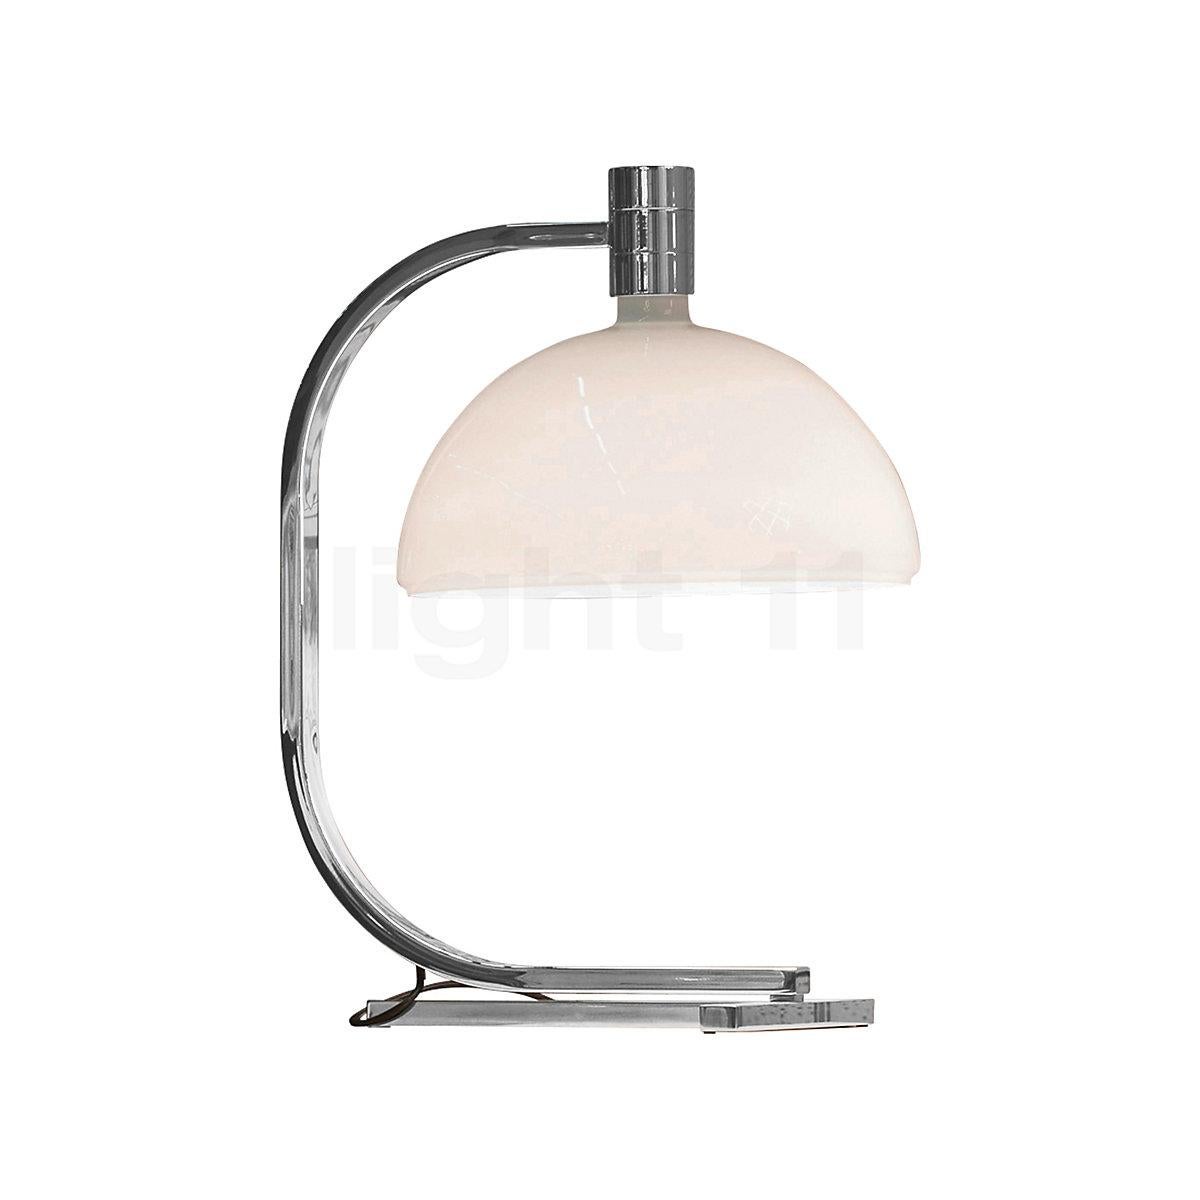 Franco Albini & Franca Helg  The table Lamp for Sirrah designed by one of the most important Italian architects  in pair with Franca Helg , a talented singer to the tune of the sixteenth year.
The lamp is chromed steel and opal glass .
This is